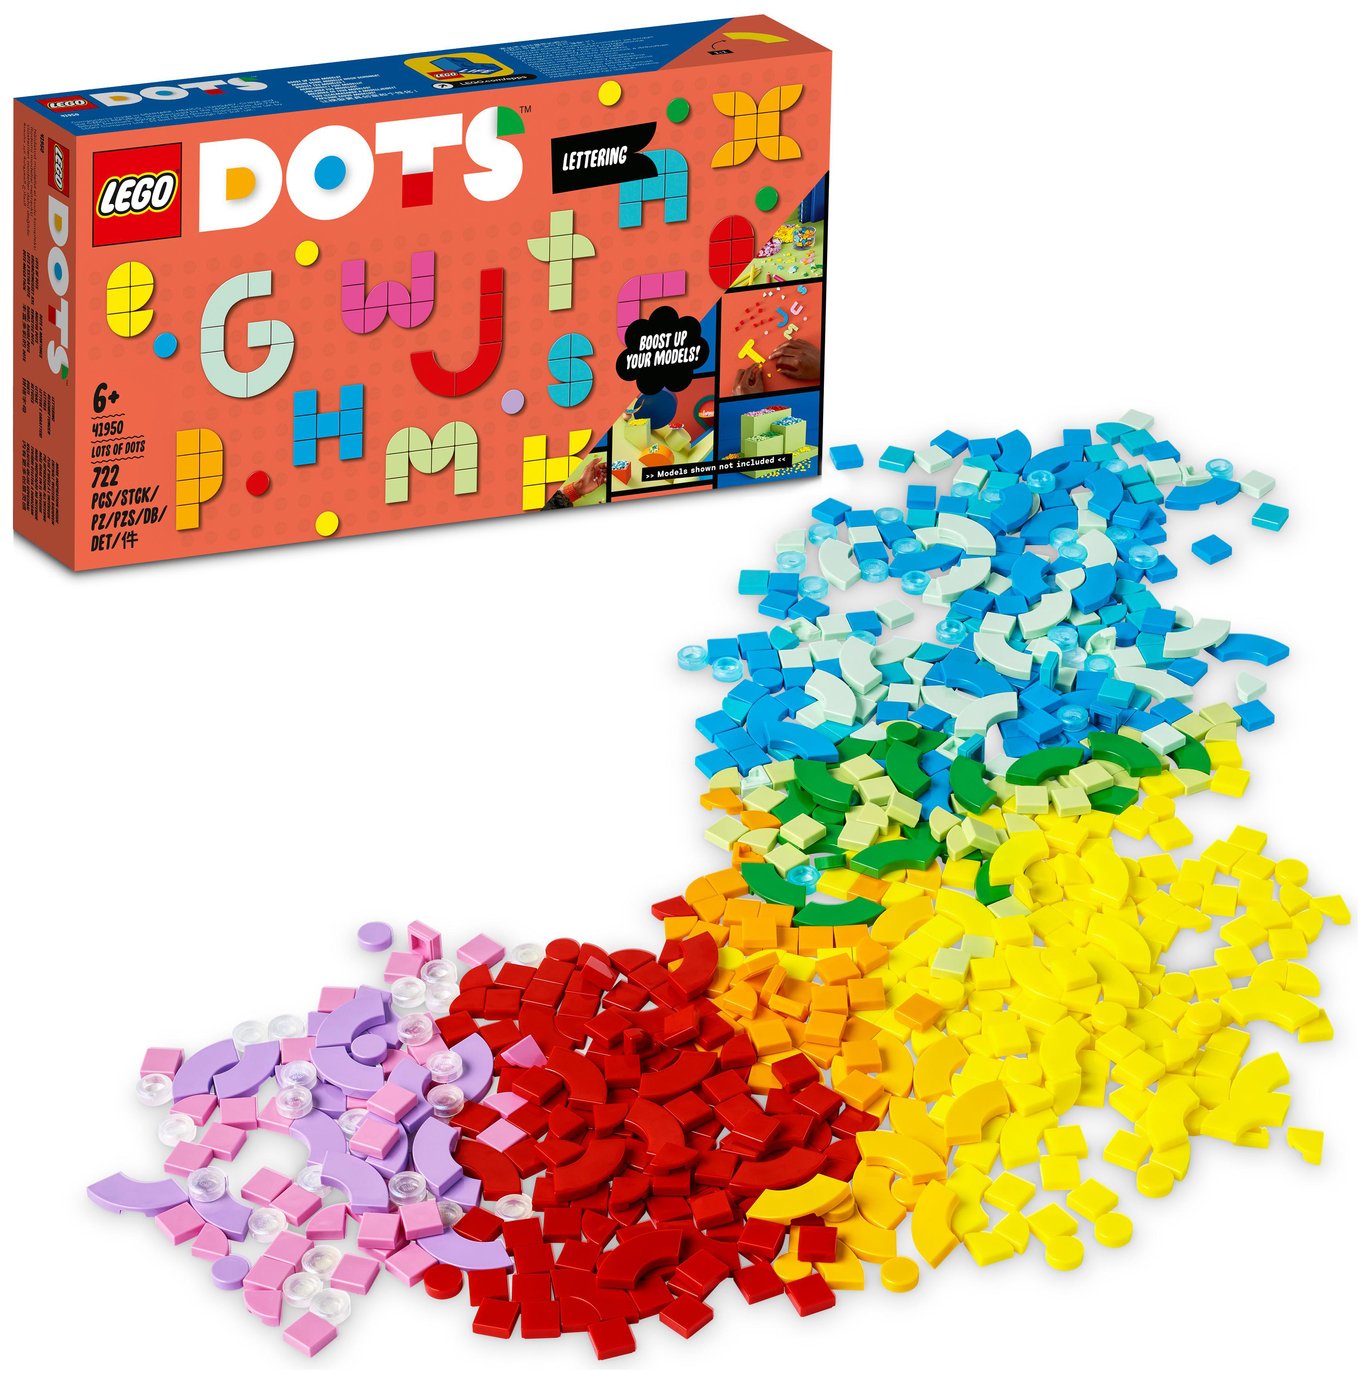 LEGO DOTS Lots of DOTS Lettering Set 41950